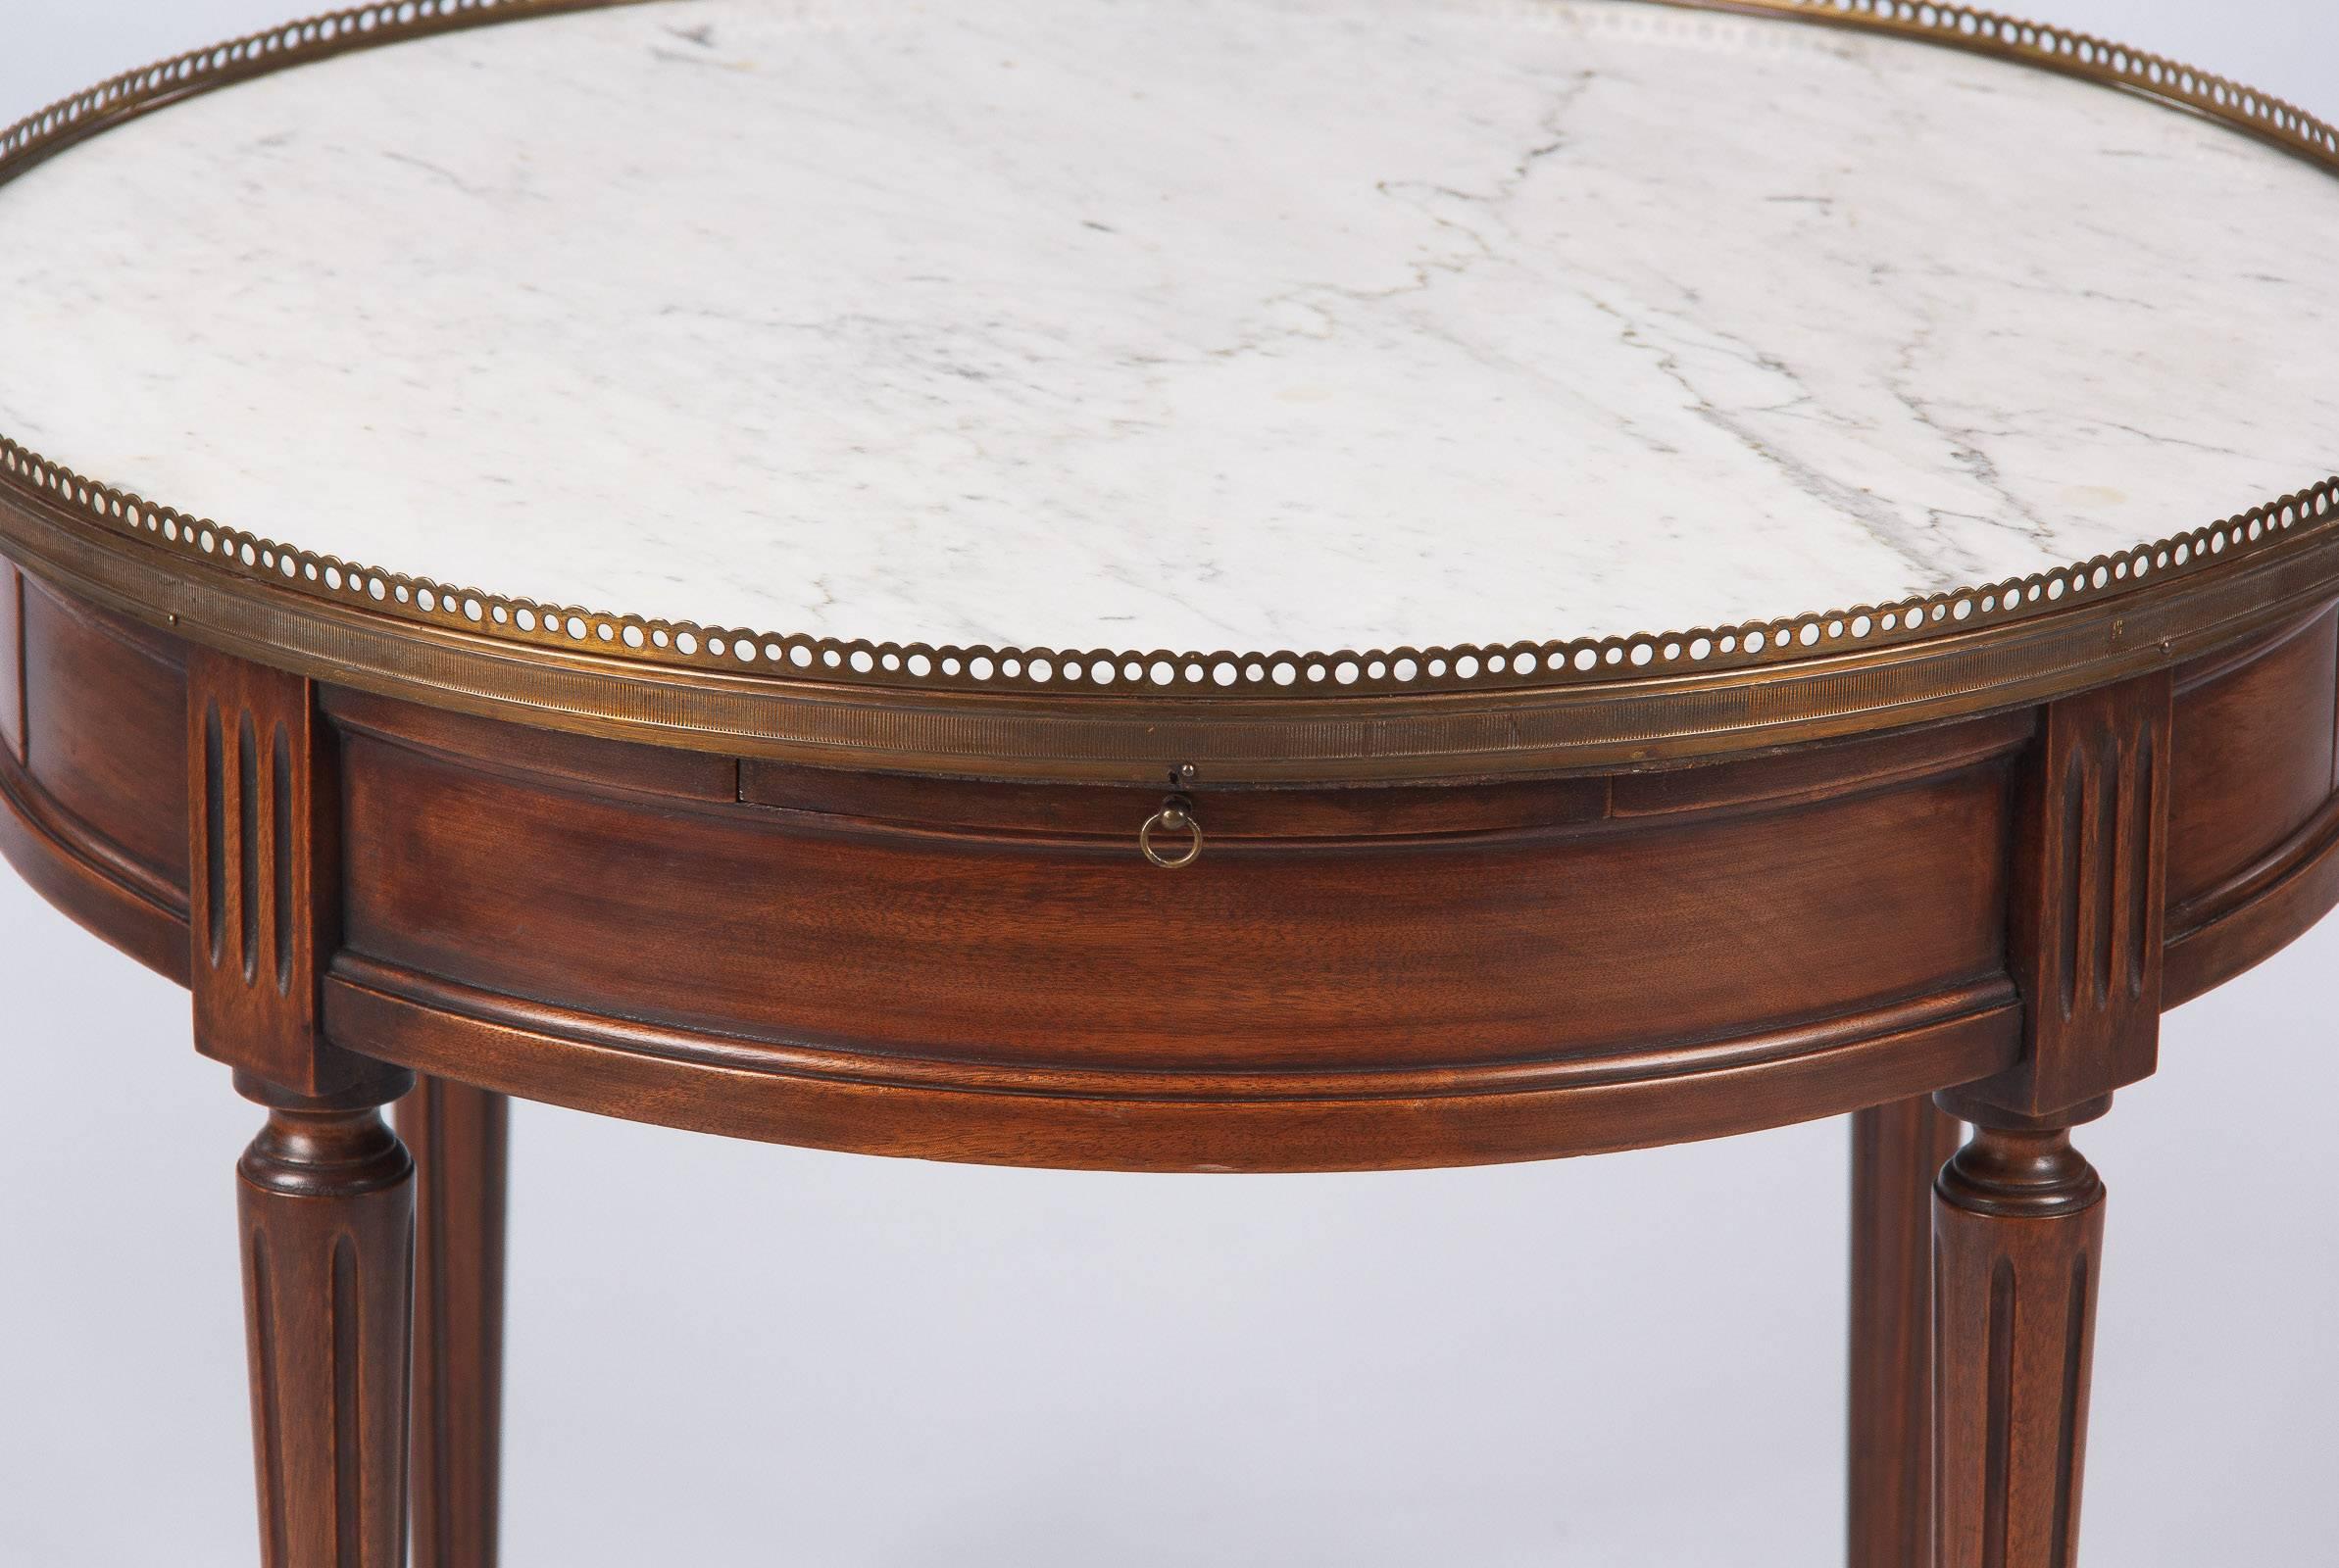 20th Century Louis XVI Style Marble-Top Coffee or Side Table, Early 1900s